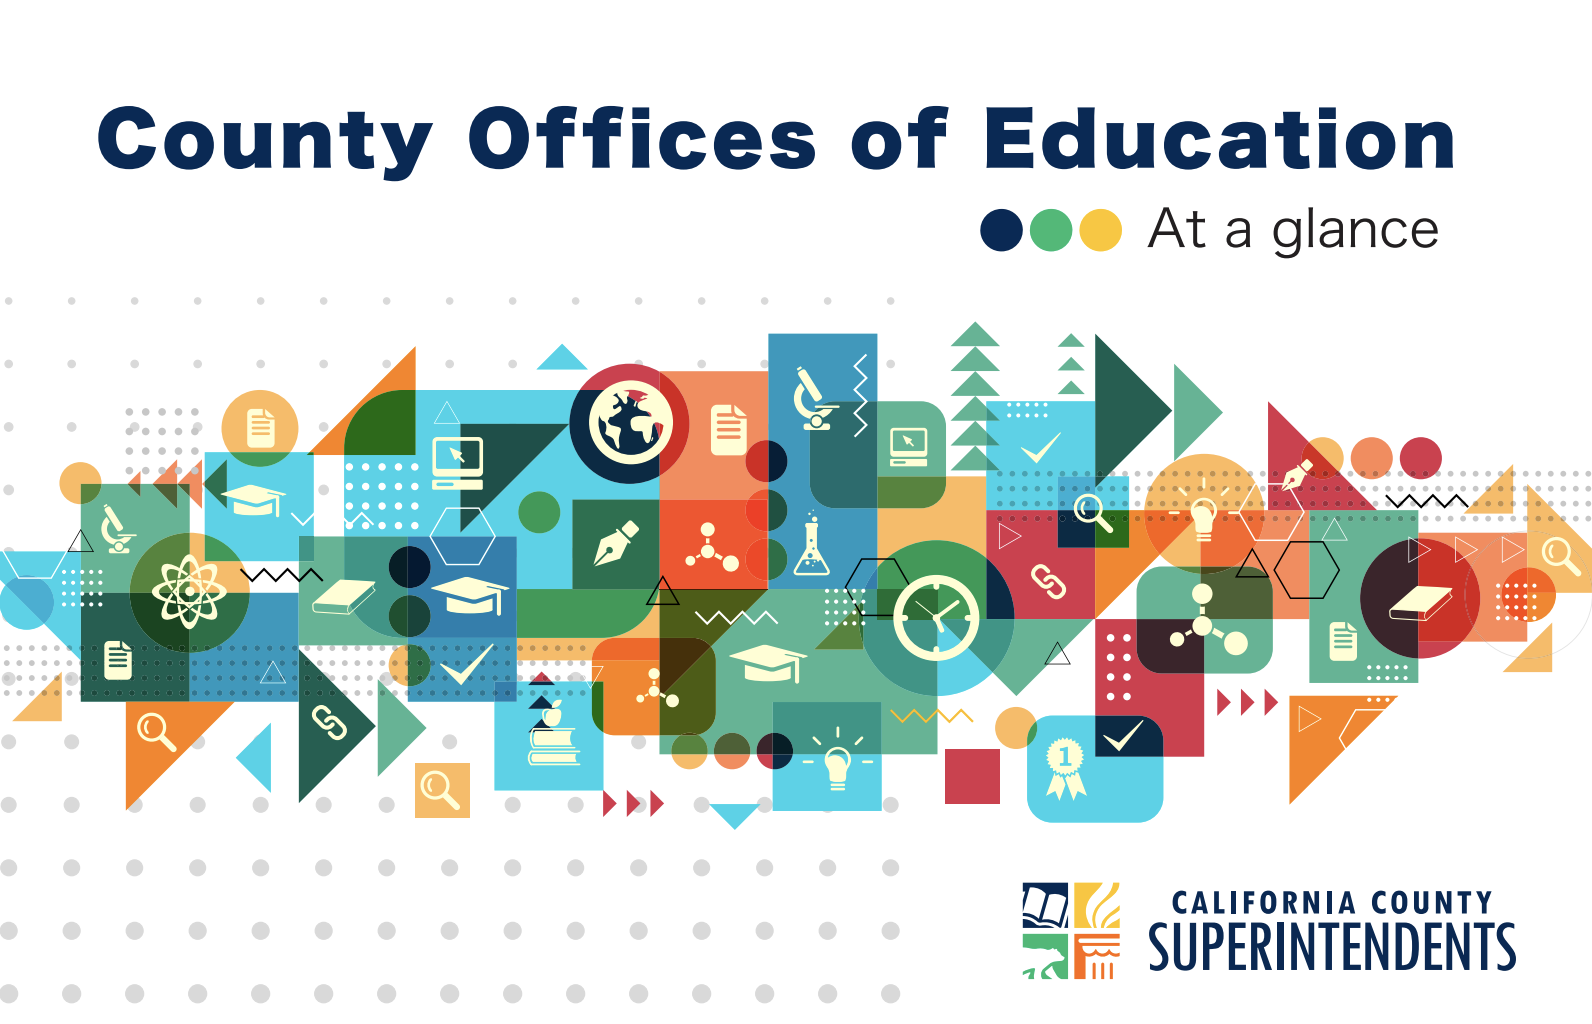 County Offices of Education by California County Superintendents